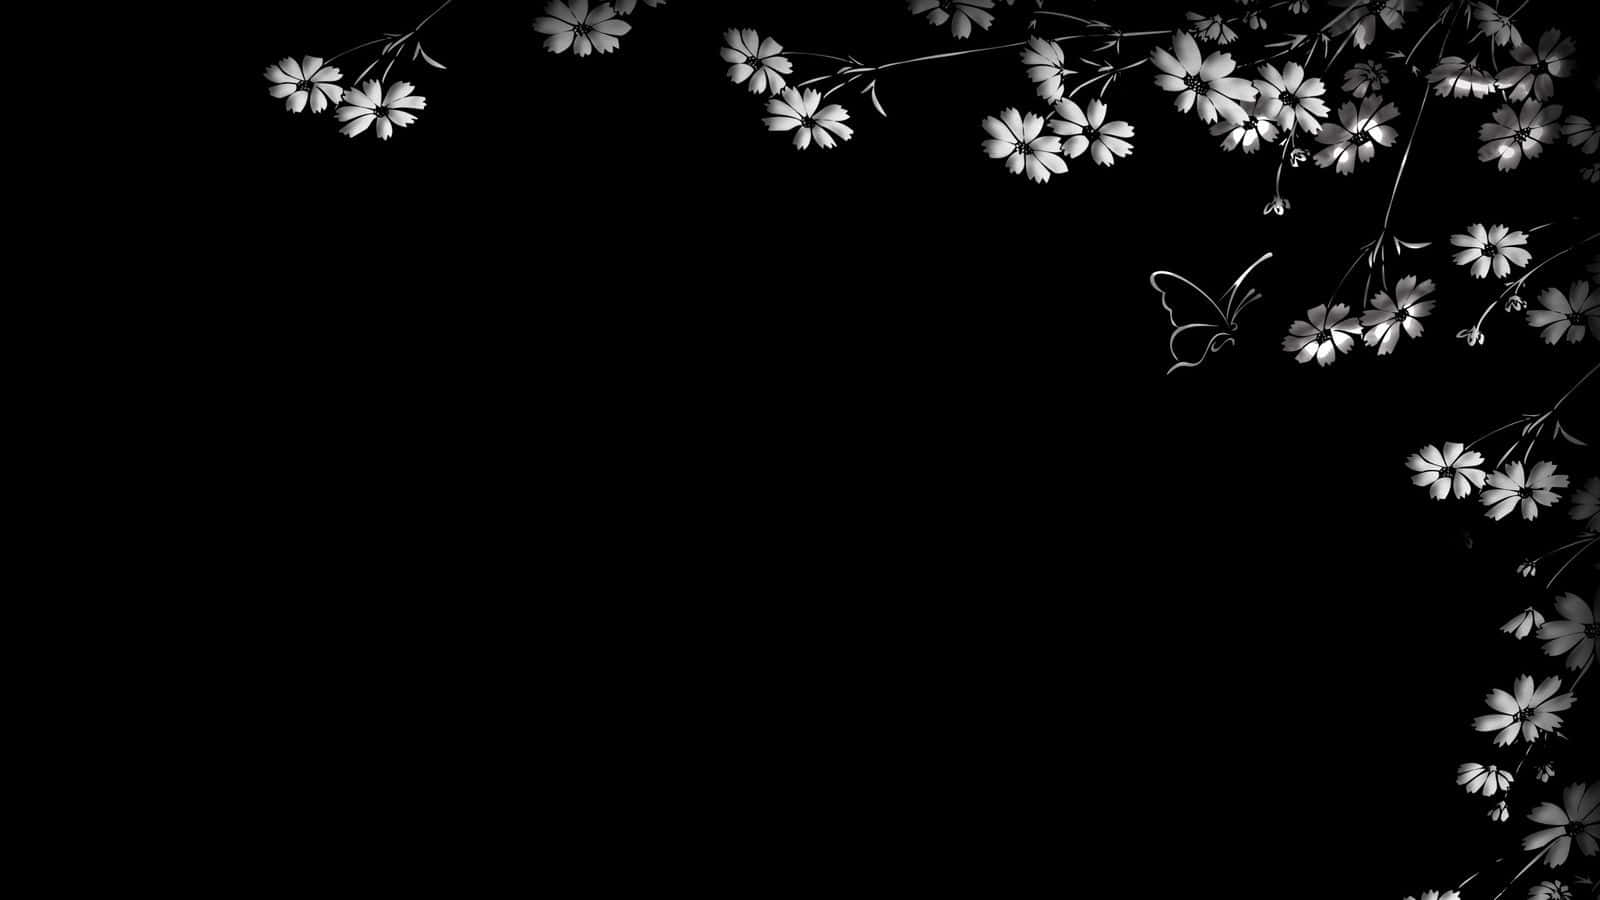 Aesthetic Black With Flowers Border Background